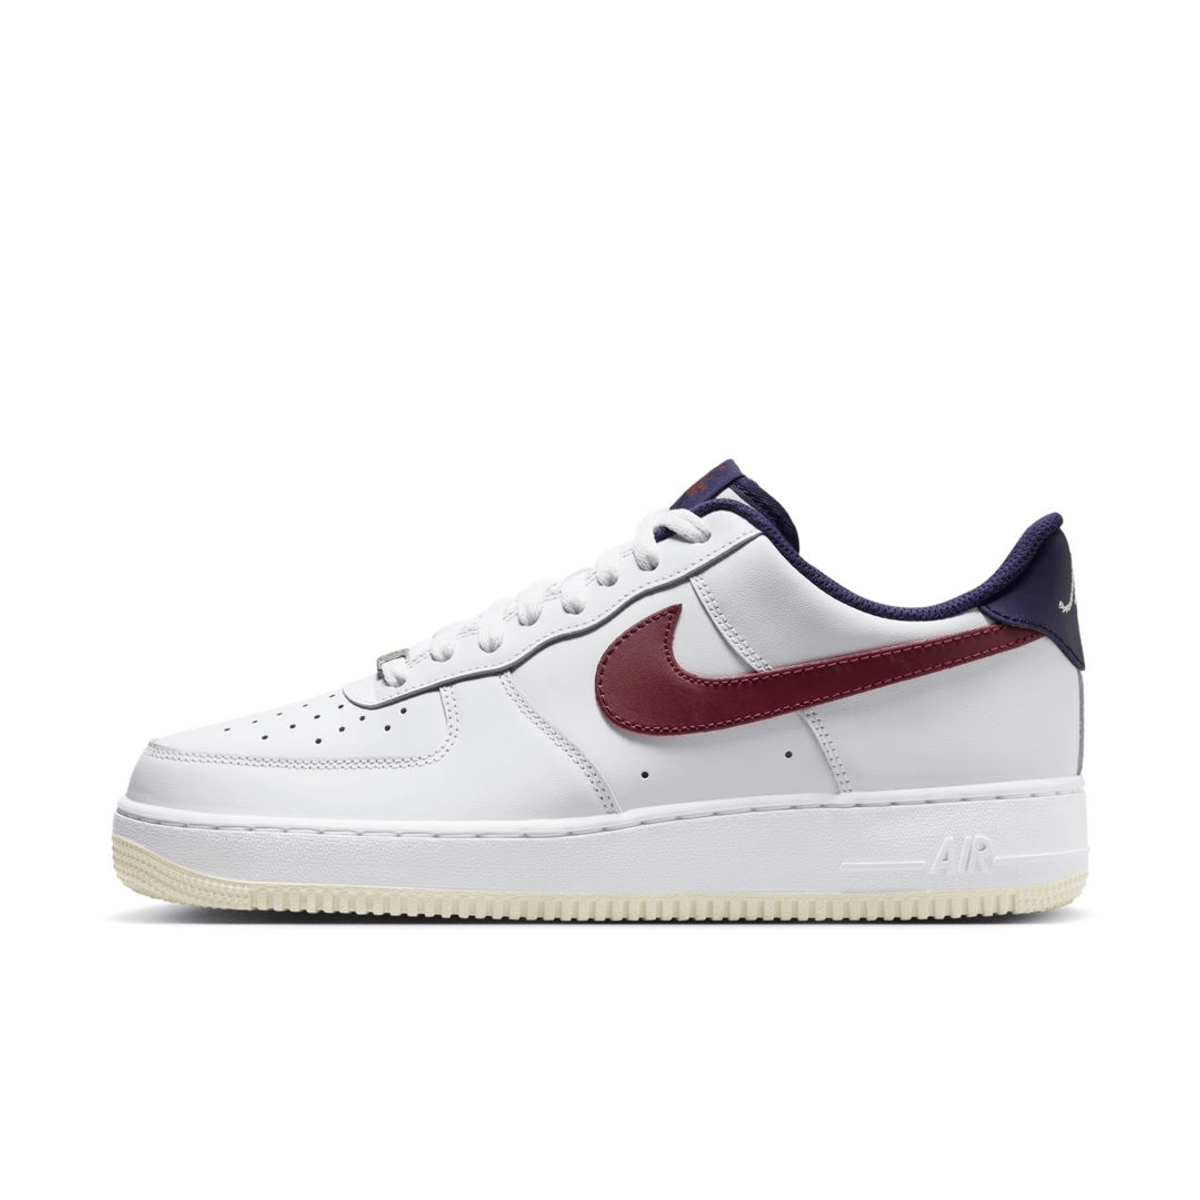 Official Images Of The Nike Air Force 1 Low "From Nike To You"